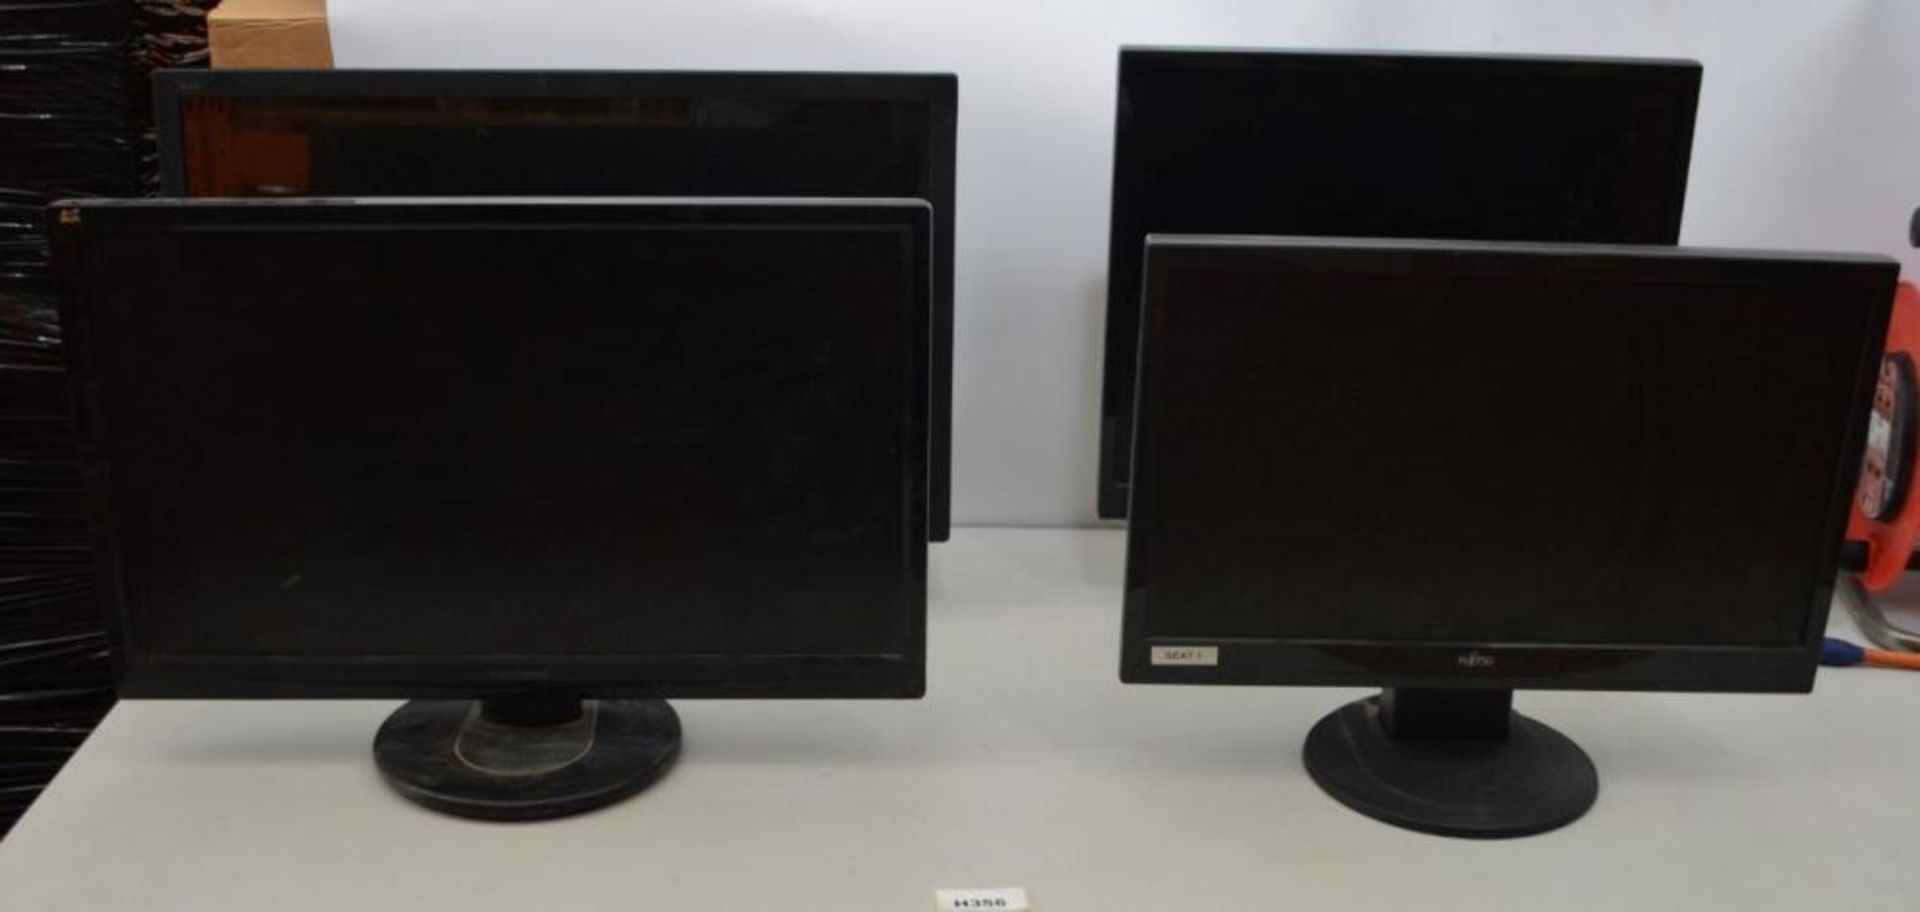 4 x Various Computer PC Monitors - Not Working / Unknown Faults - Ref H356 - CL394 - Location: Altri